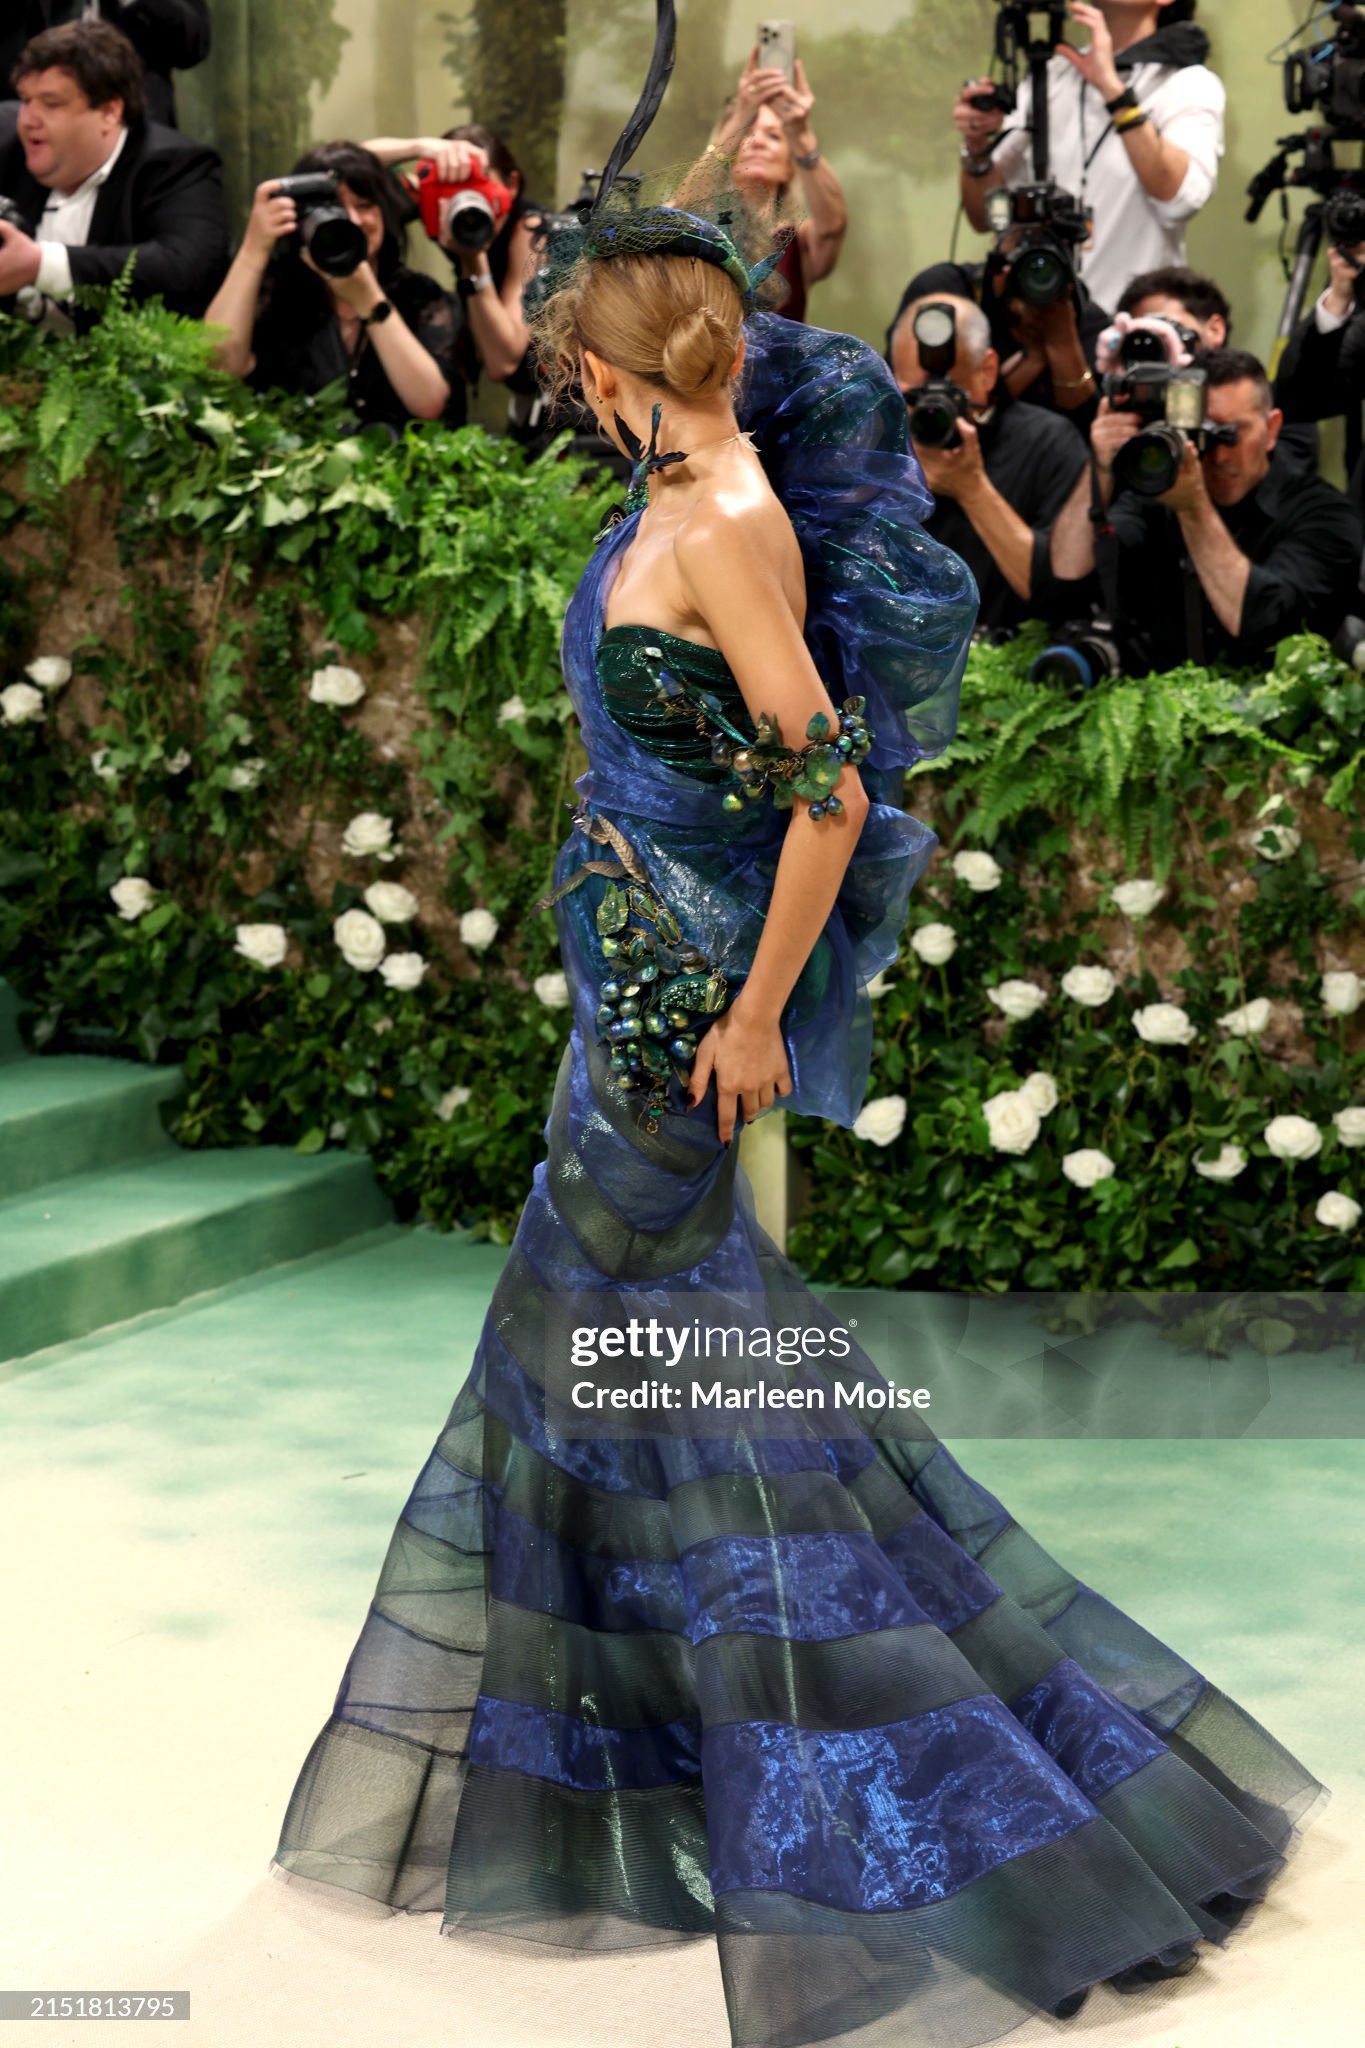 gettyimages-2151813795-2048x2048.jpg